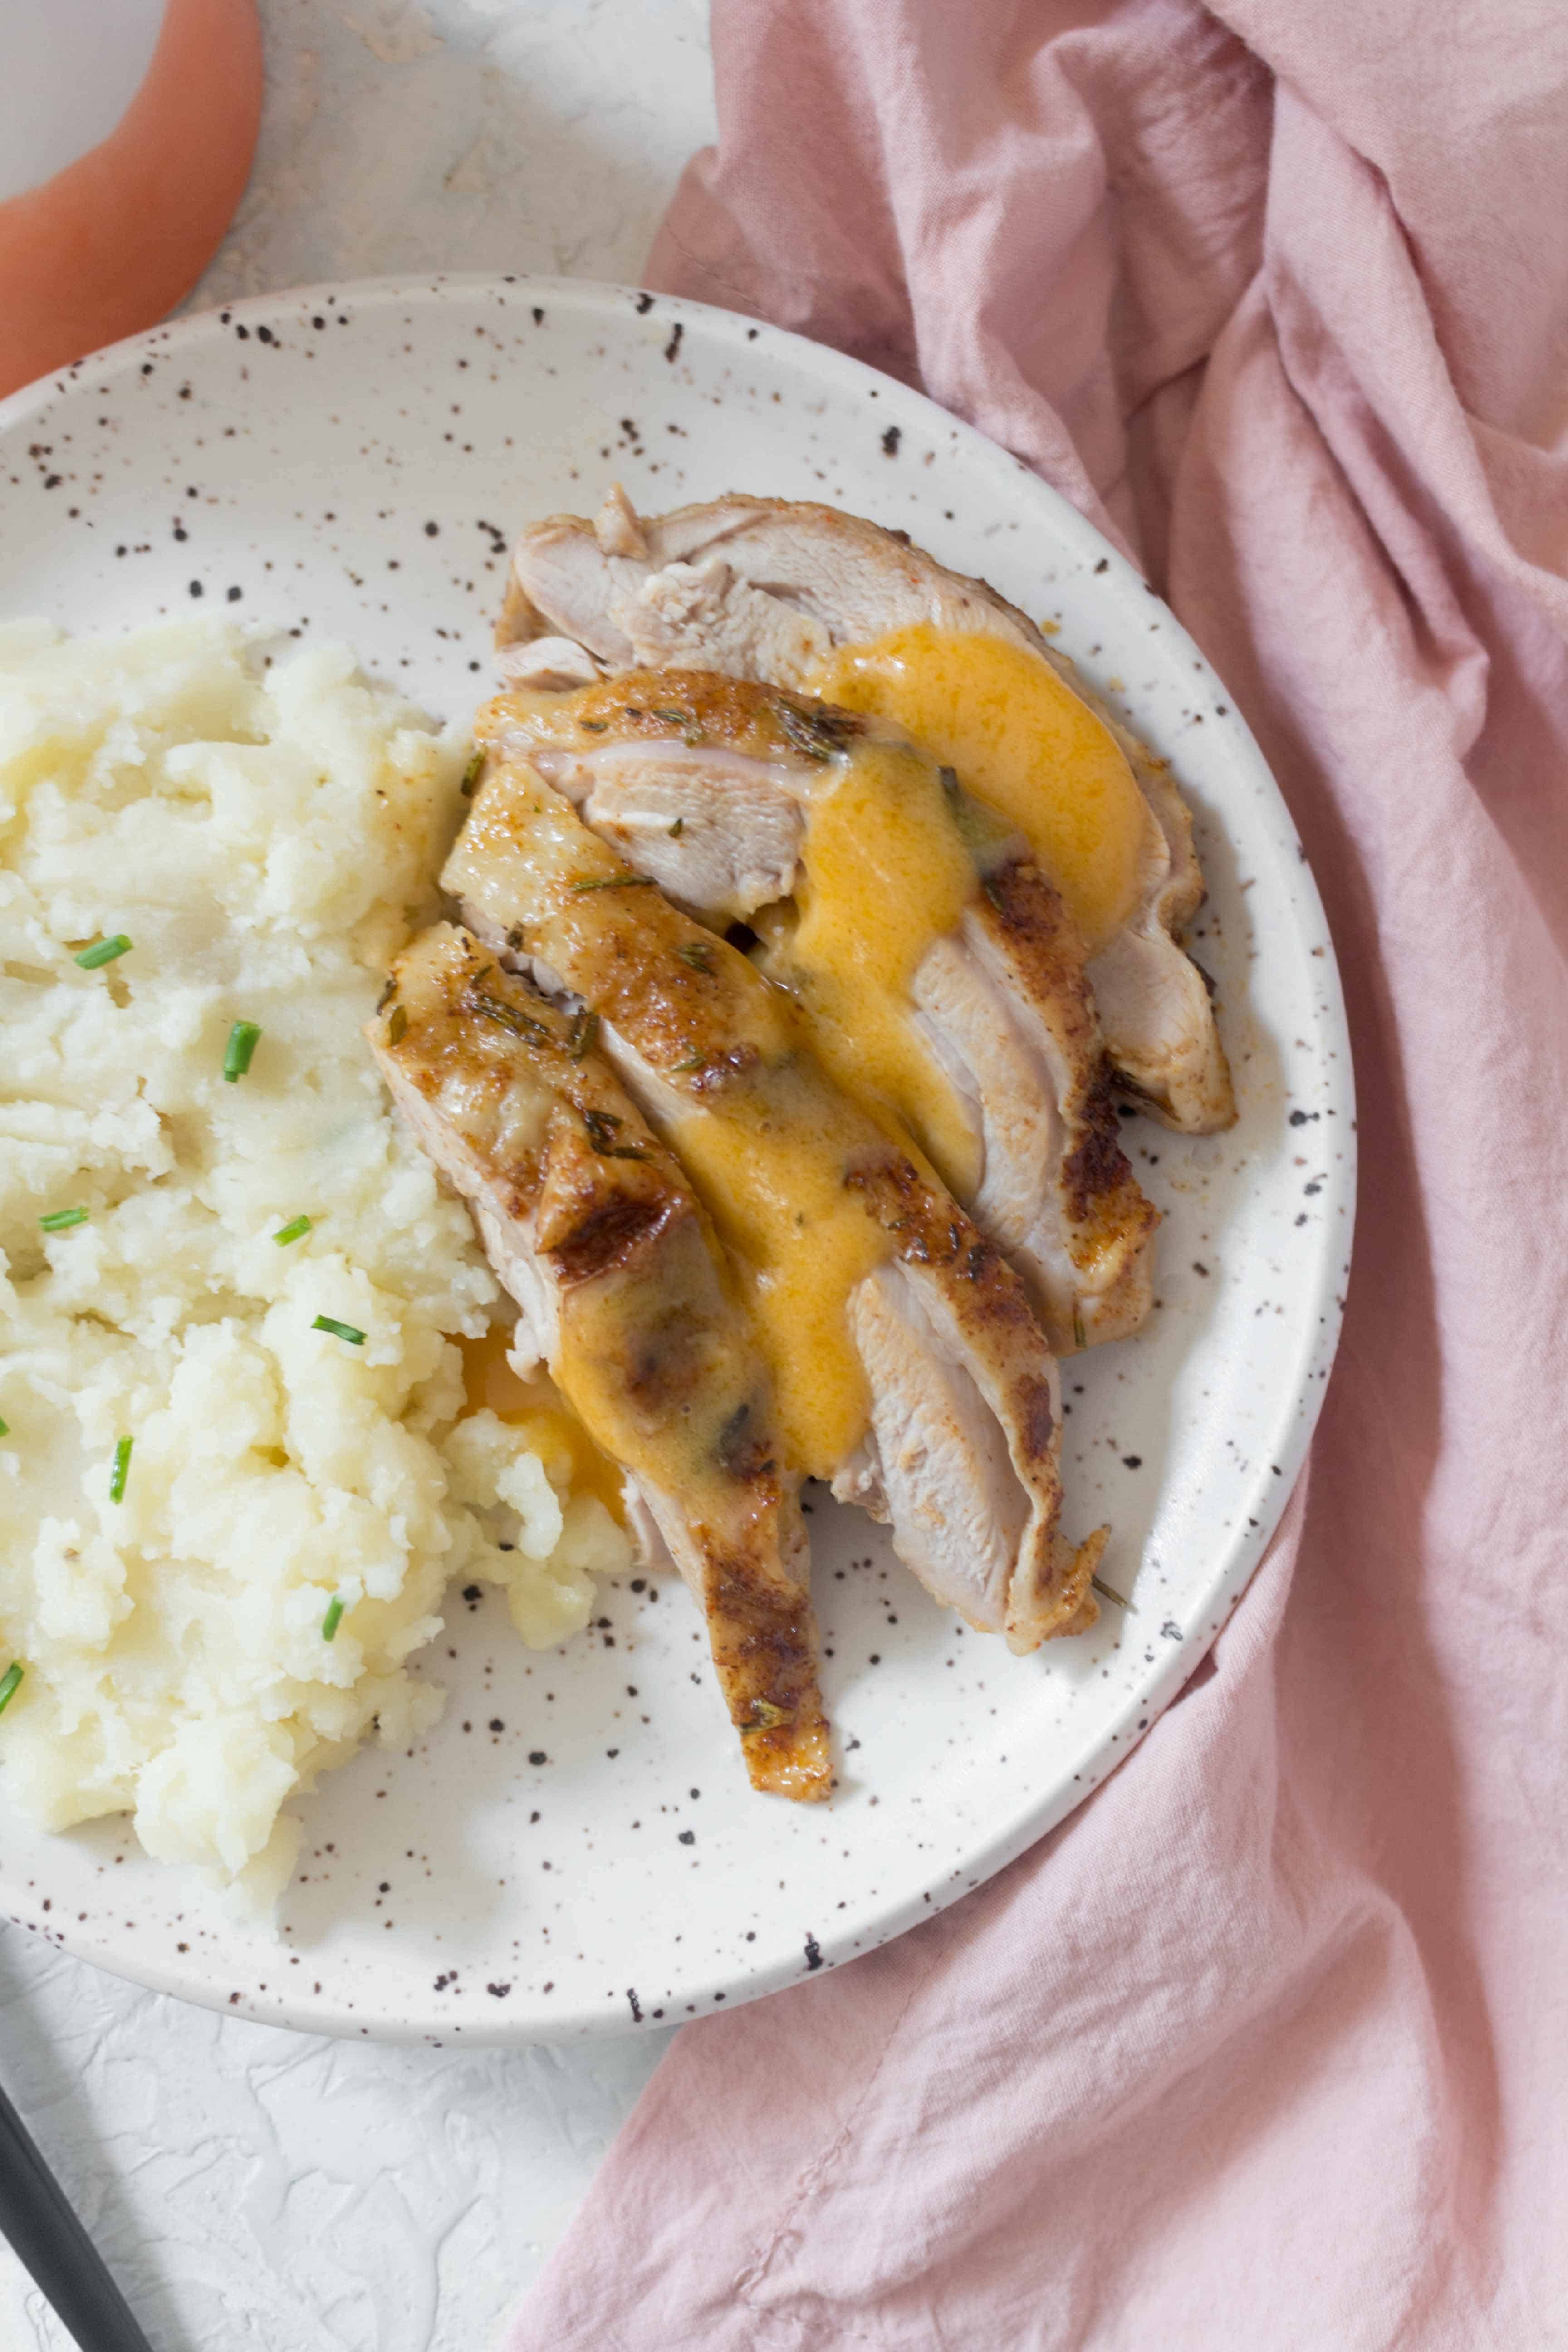 This Oven Roasted Turkey Thighs recipe is so simple to throw together - it's perfect if you want to skip cooking a whole turkey! Gravy instructions are included.